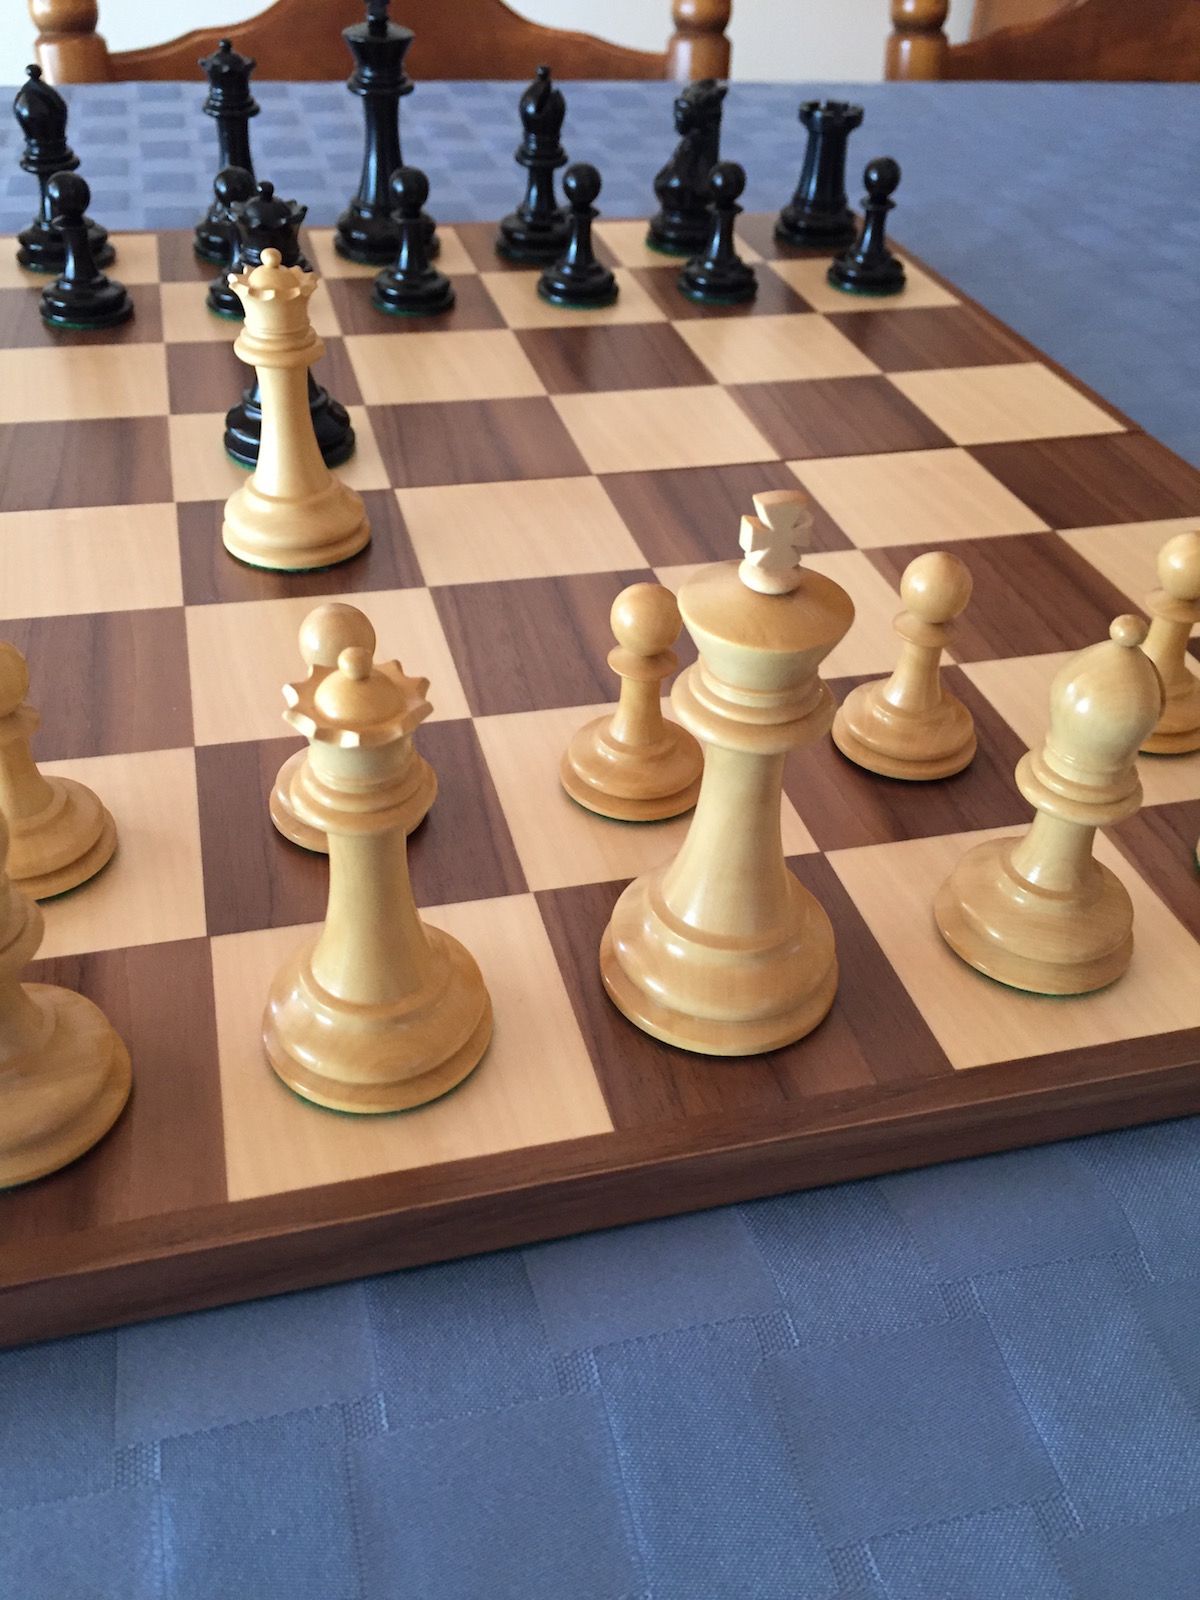 Paul Morphy Series 4 Staunton Chess Pieces With Board -  Israel